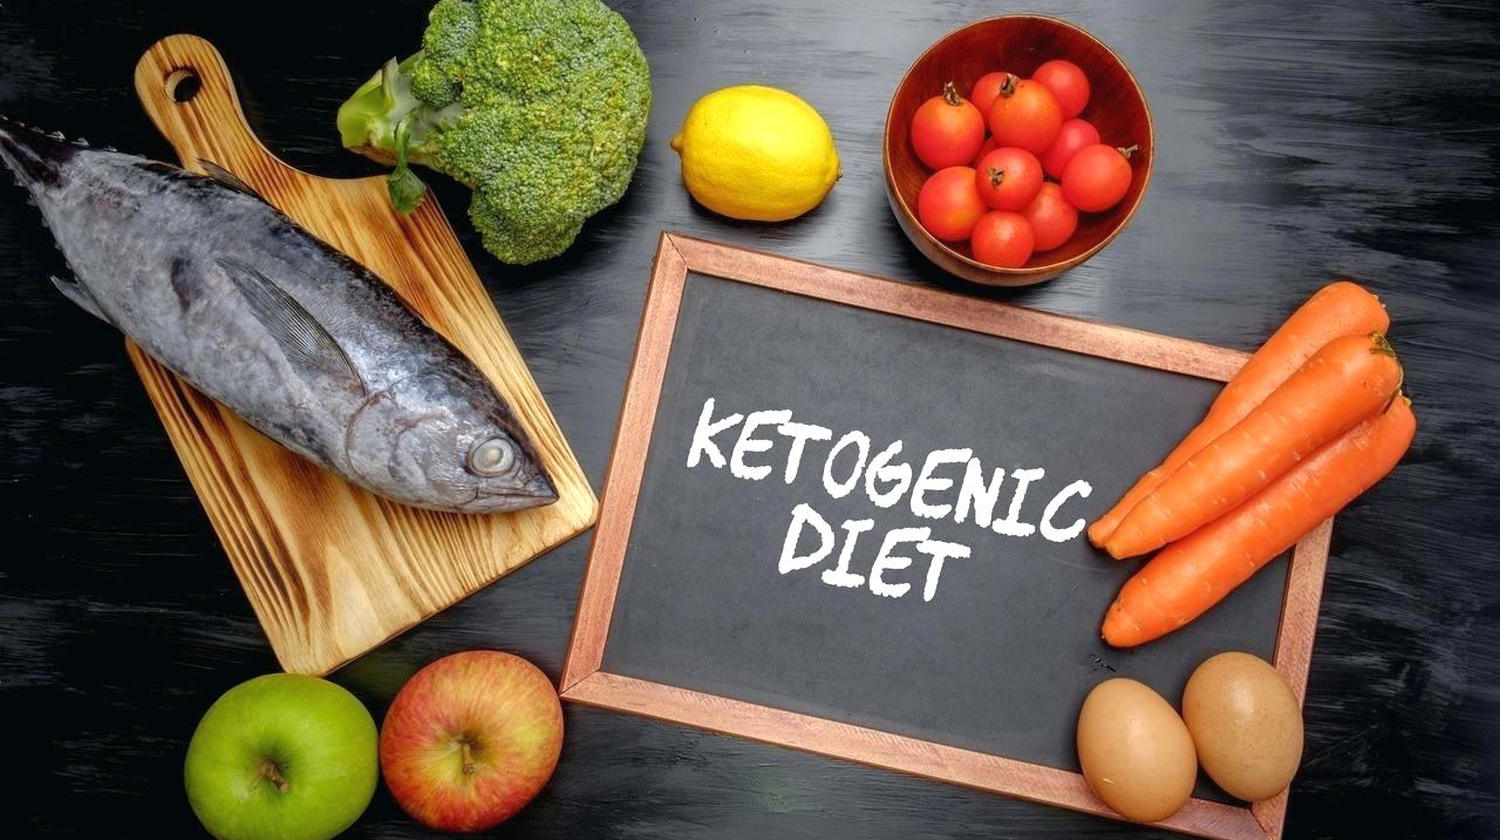 Featured | Full ketogenic diet food list | The Best Ketogenic Diet Foods To Eat